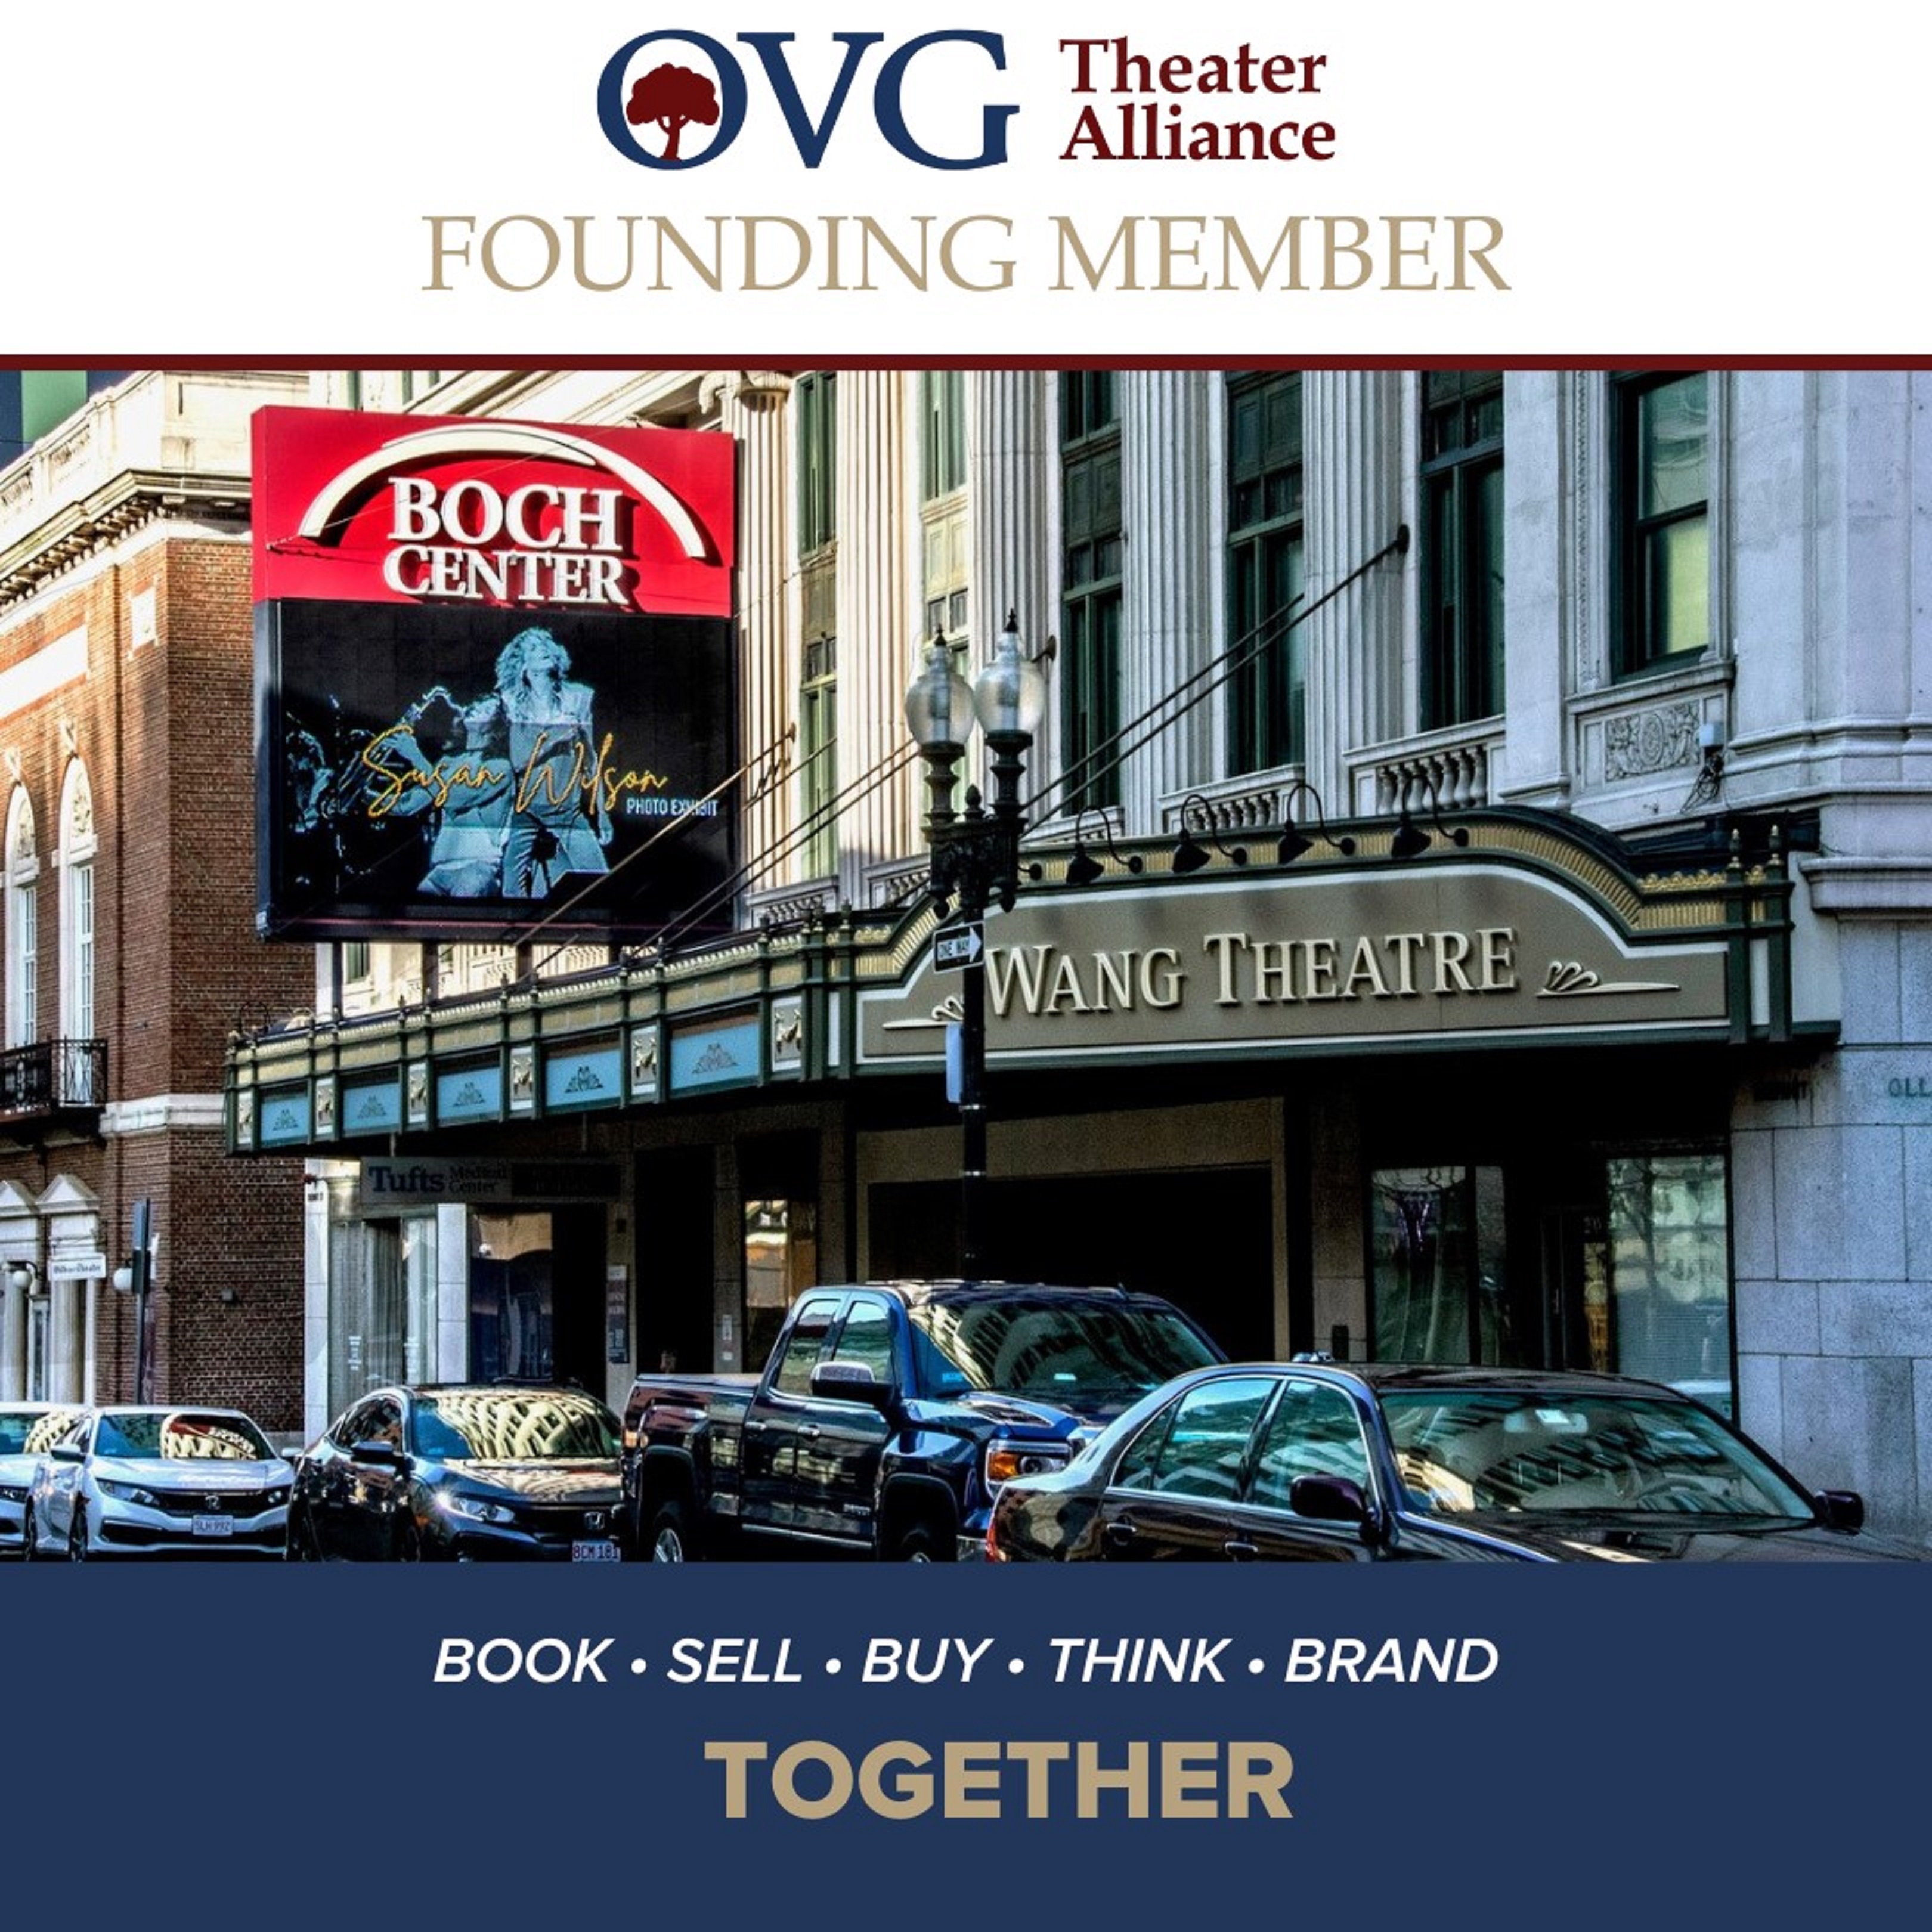 Boch Center Joins Radio City Music Hall, Ryman Auditorium and Others in First National Theater Alliance